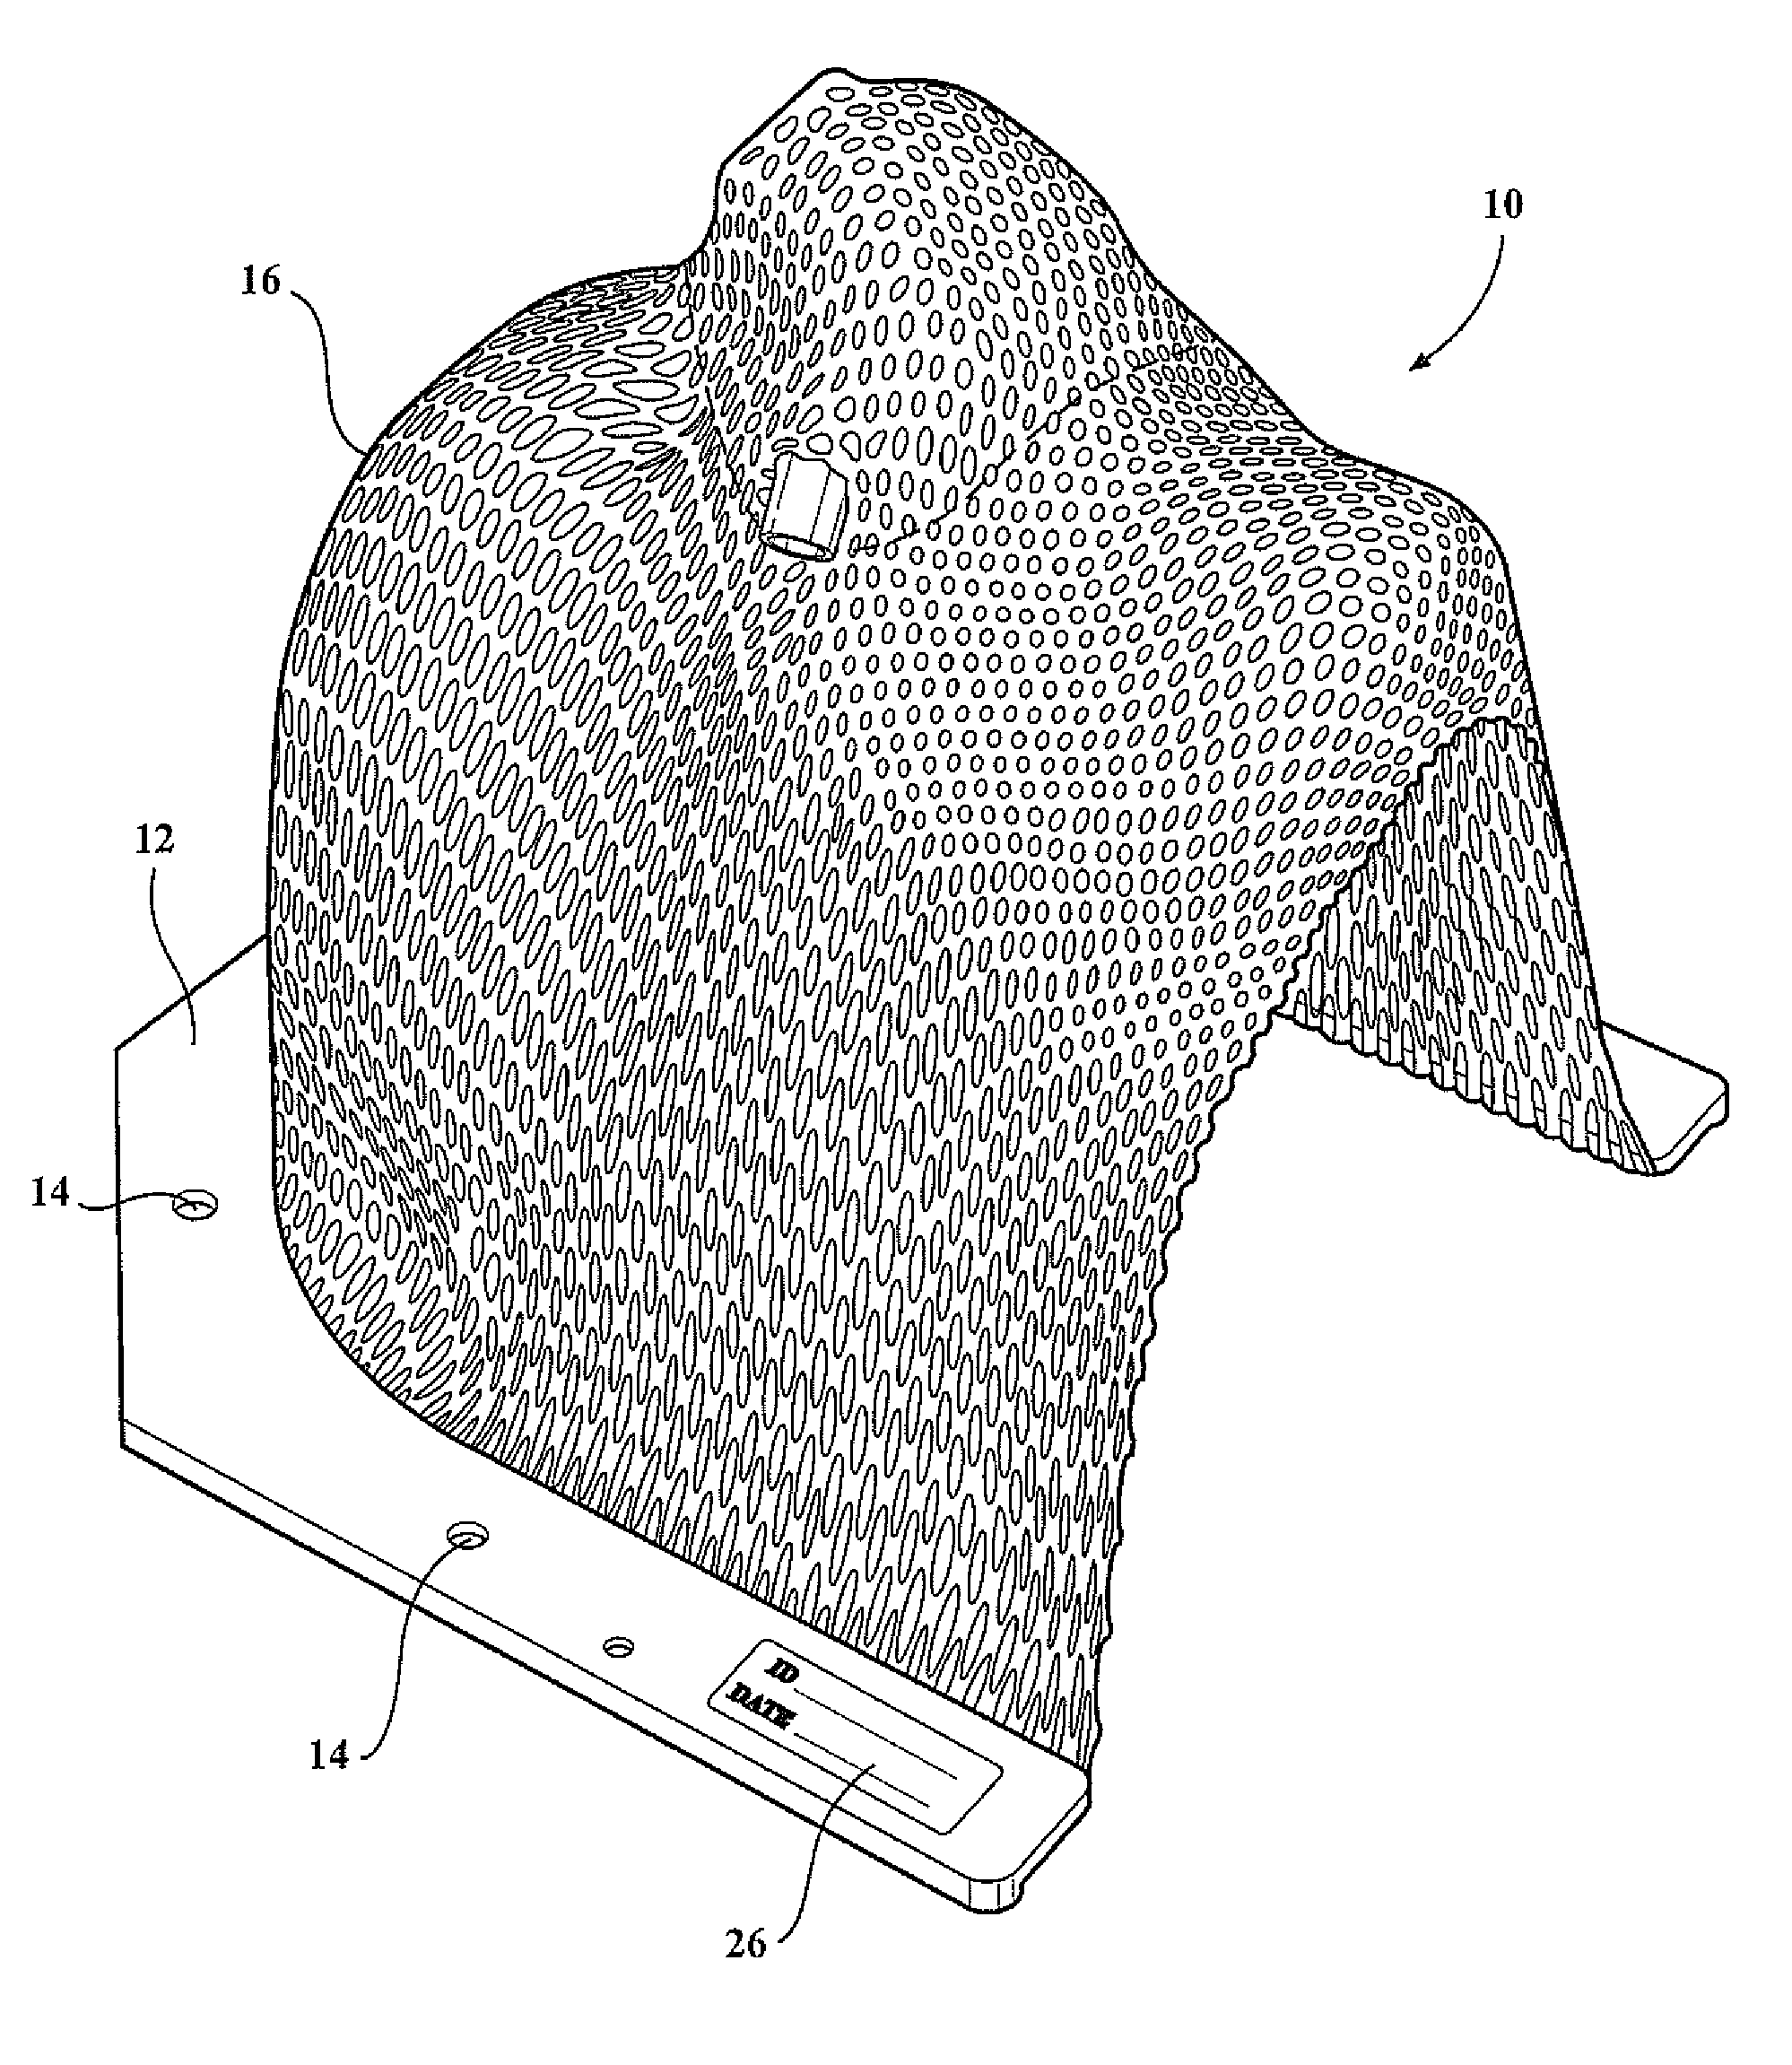 Head immobilization device with inhaler, method for making same and method of using same